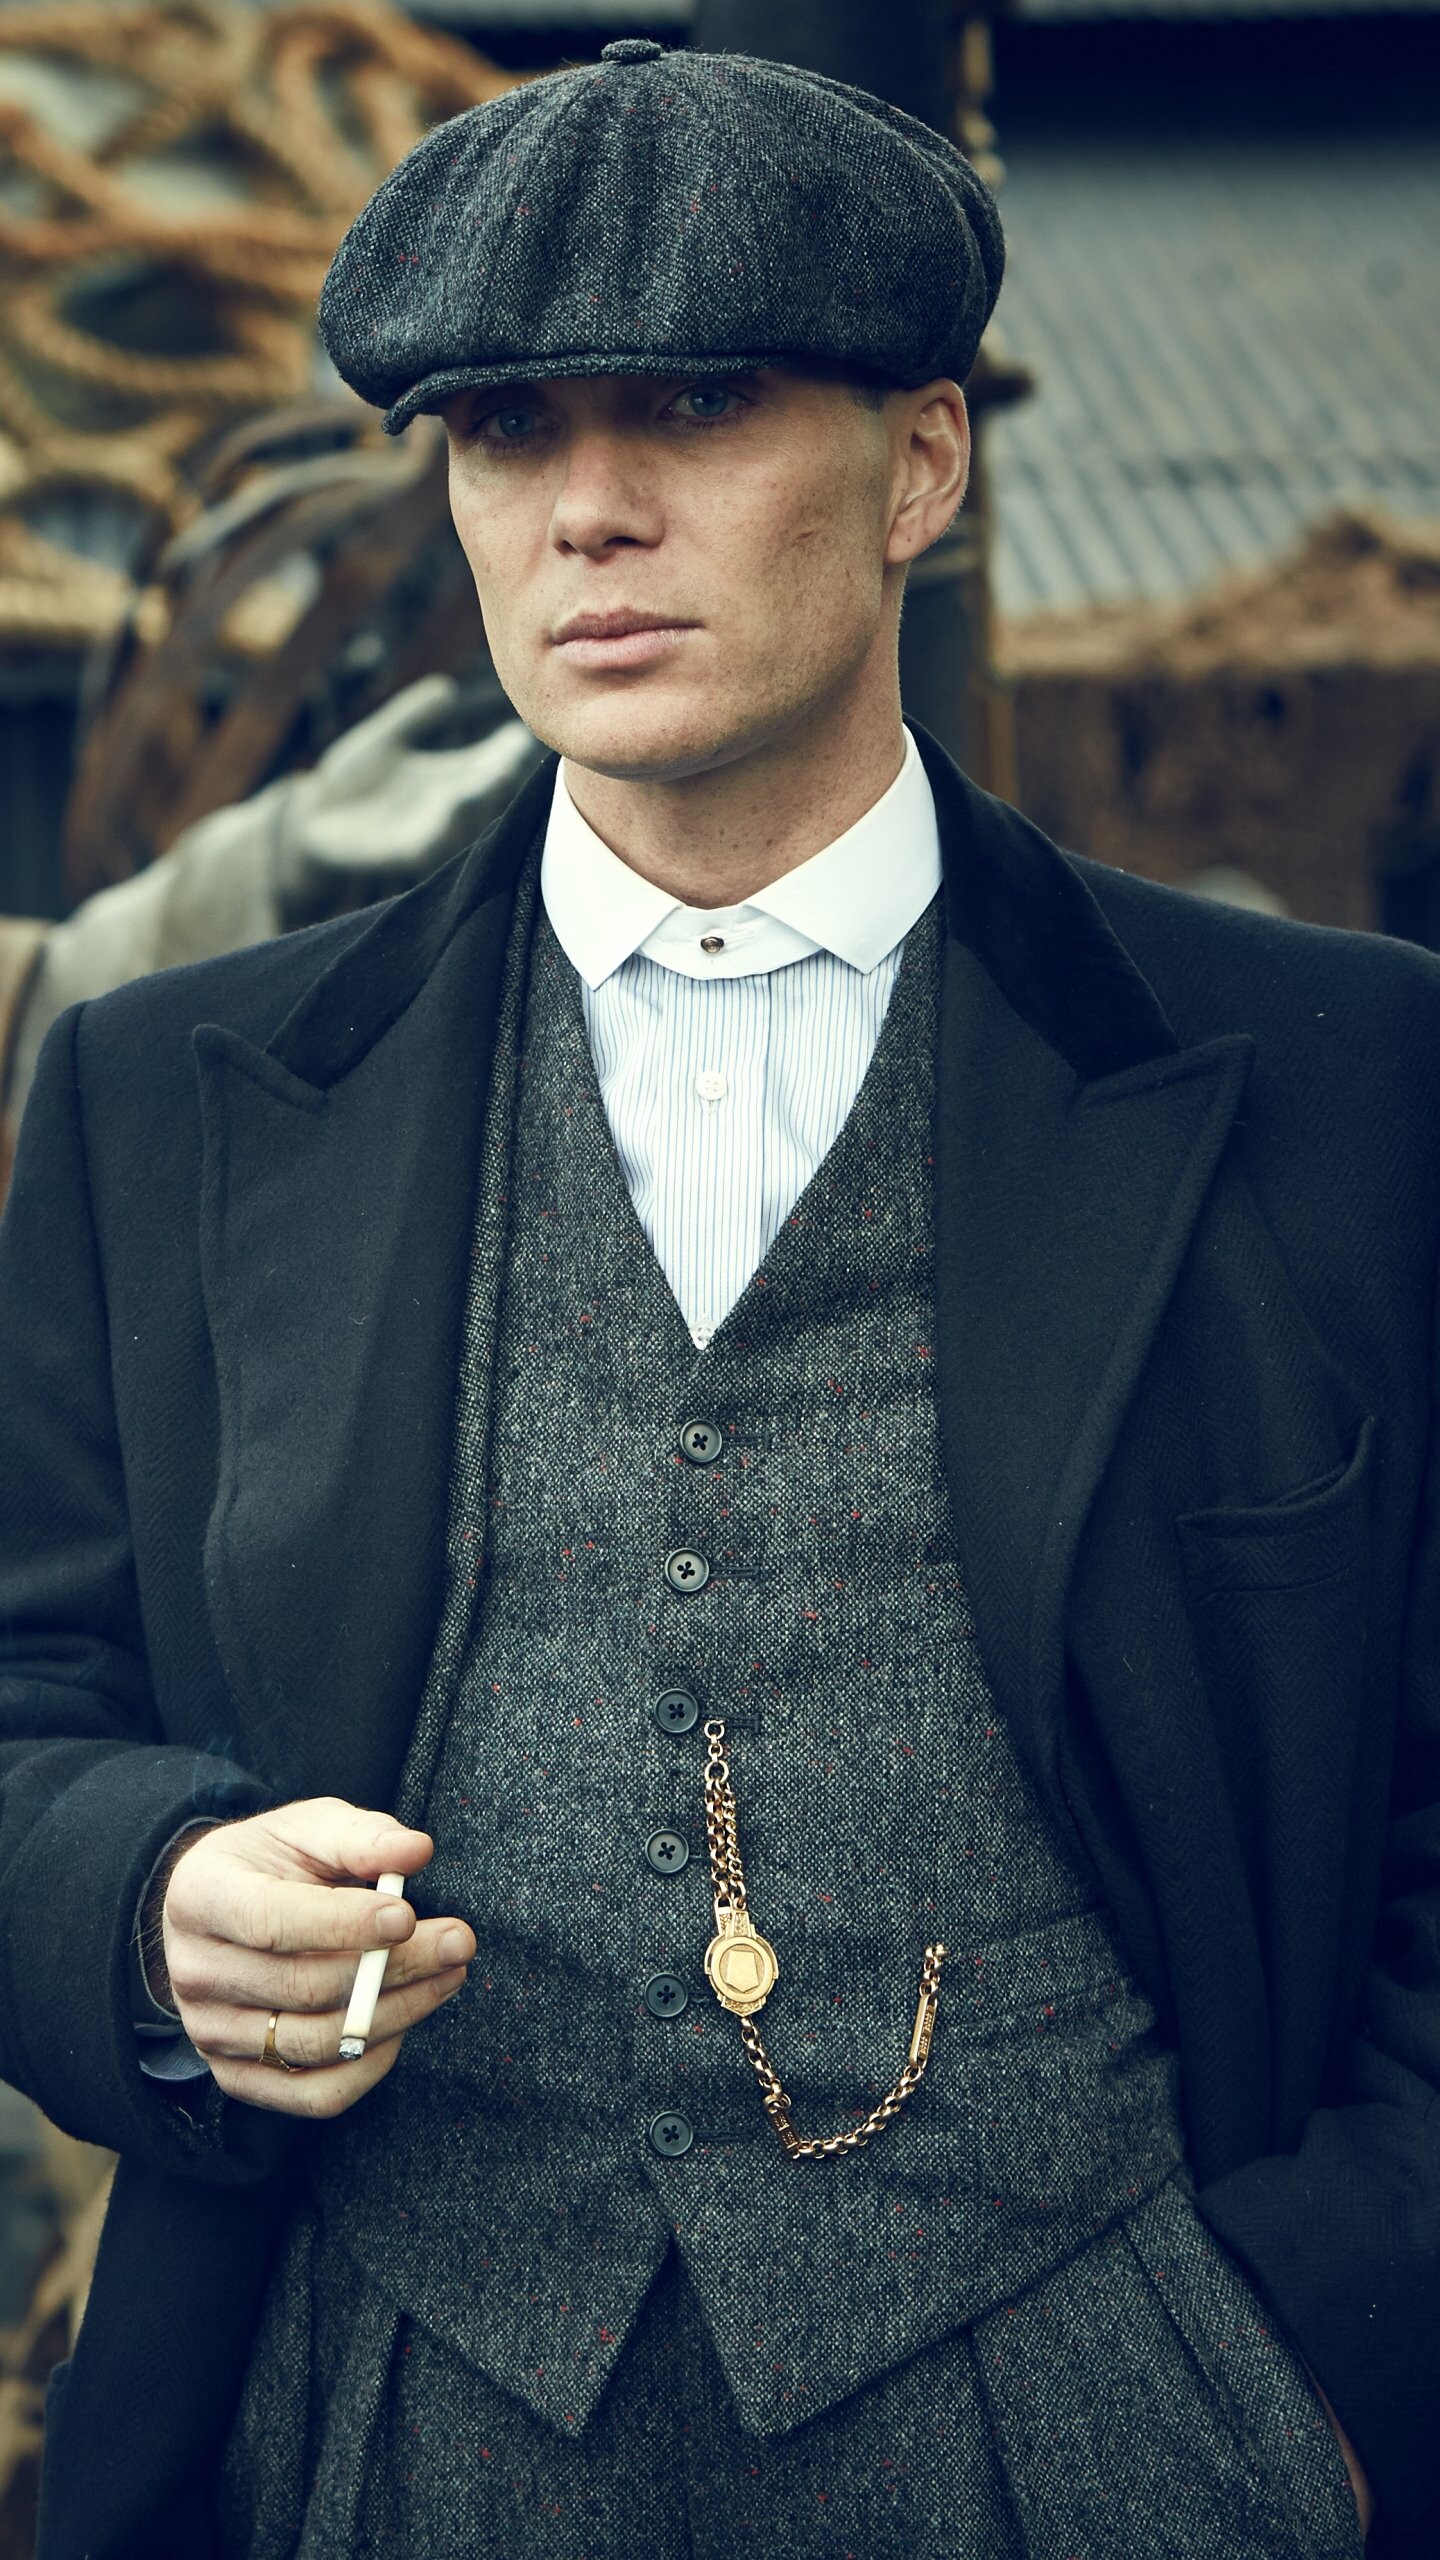 Peaky Blinders: TV Show, Member of Parliament, Mr. Shelby. 1440x2560 HD Background.